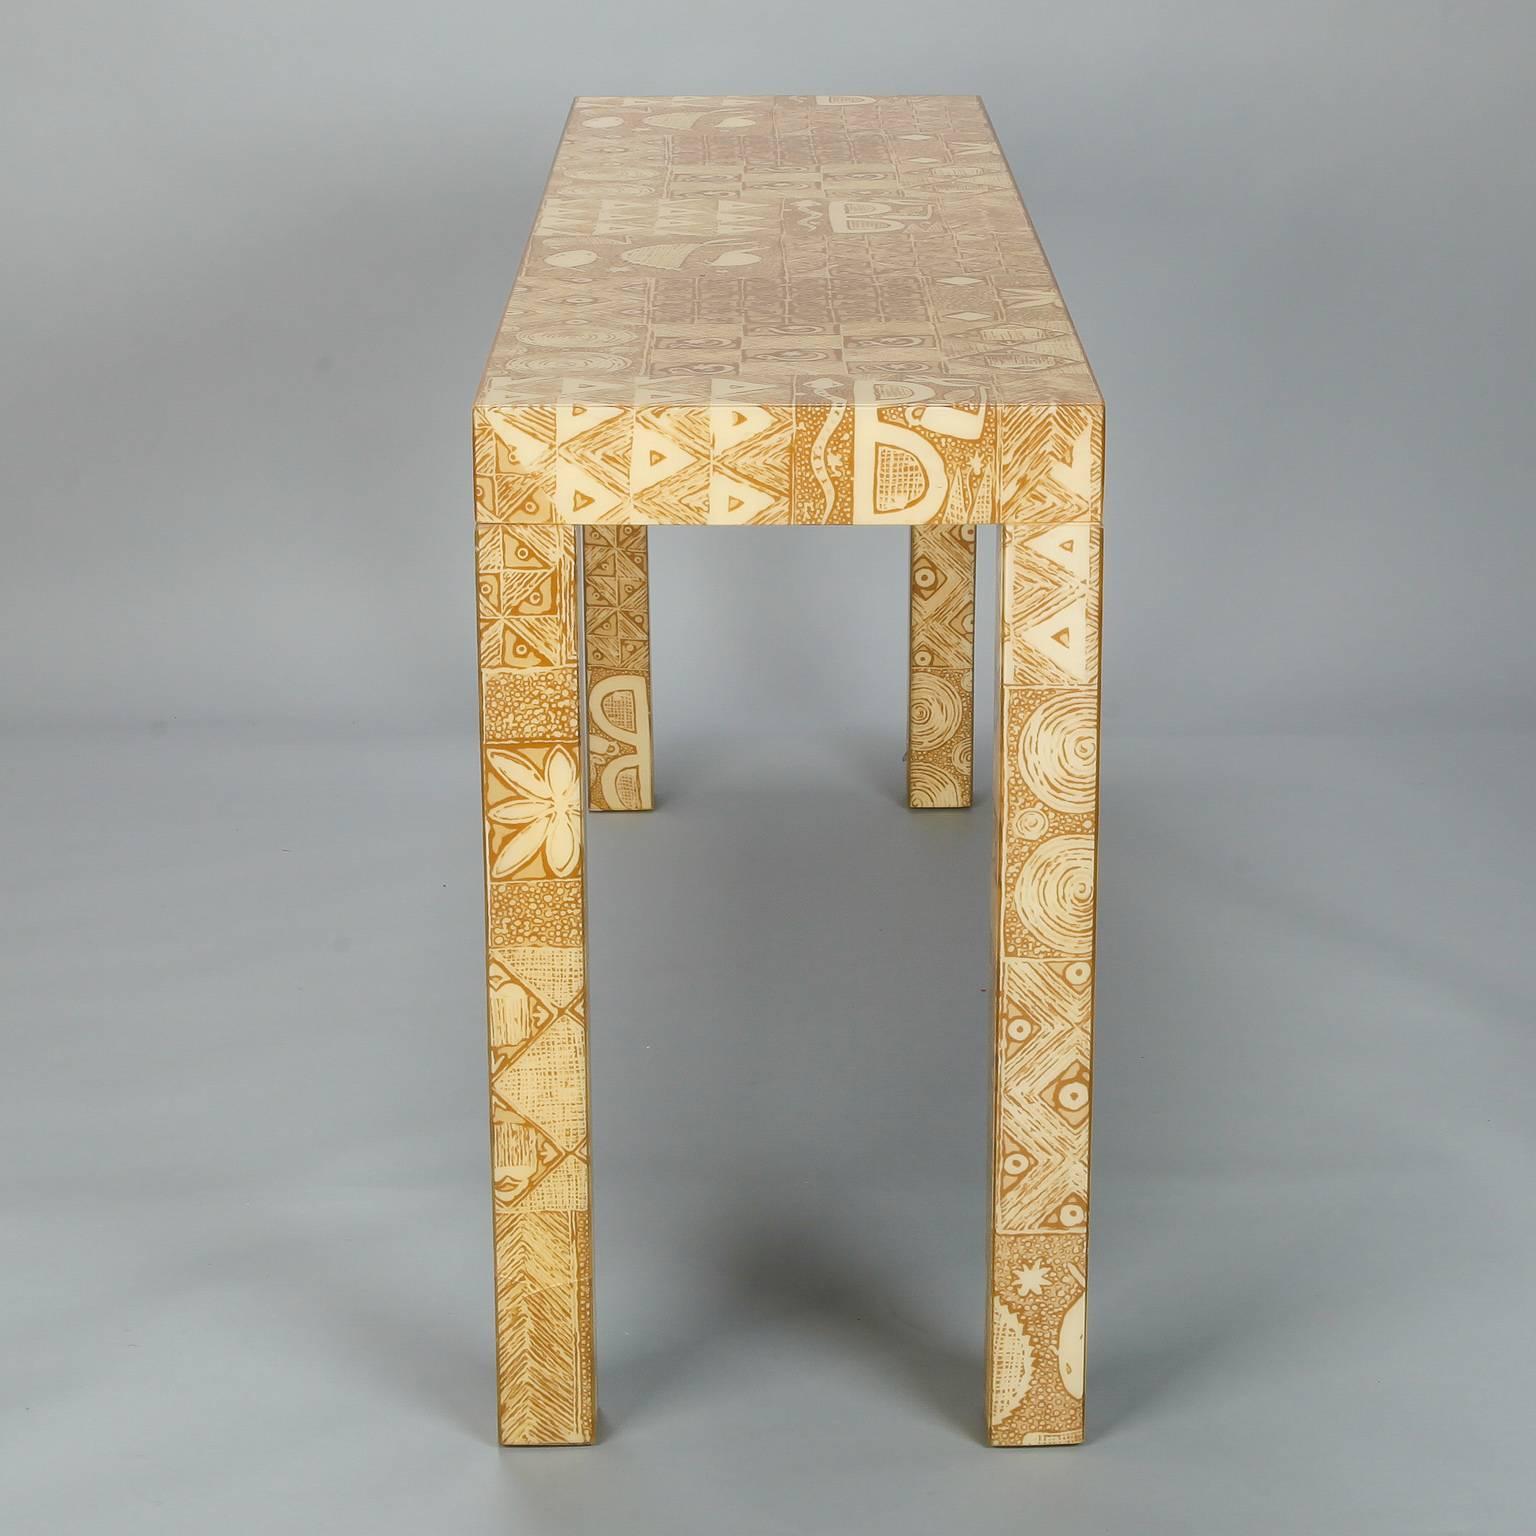 Circa 1970s Parsons style console table has a wood base covered with taupe and ivory printed fabric covered in thick, durable coat of clear acrylic. Unknown maker - found in USA.

 